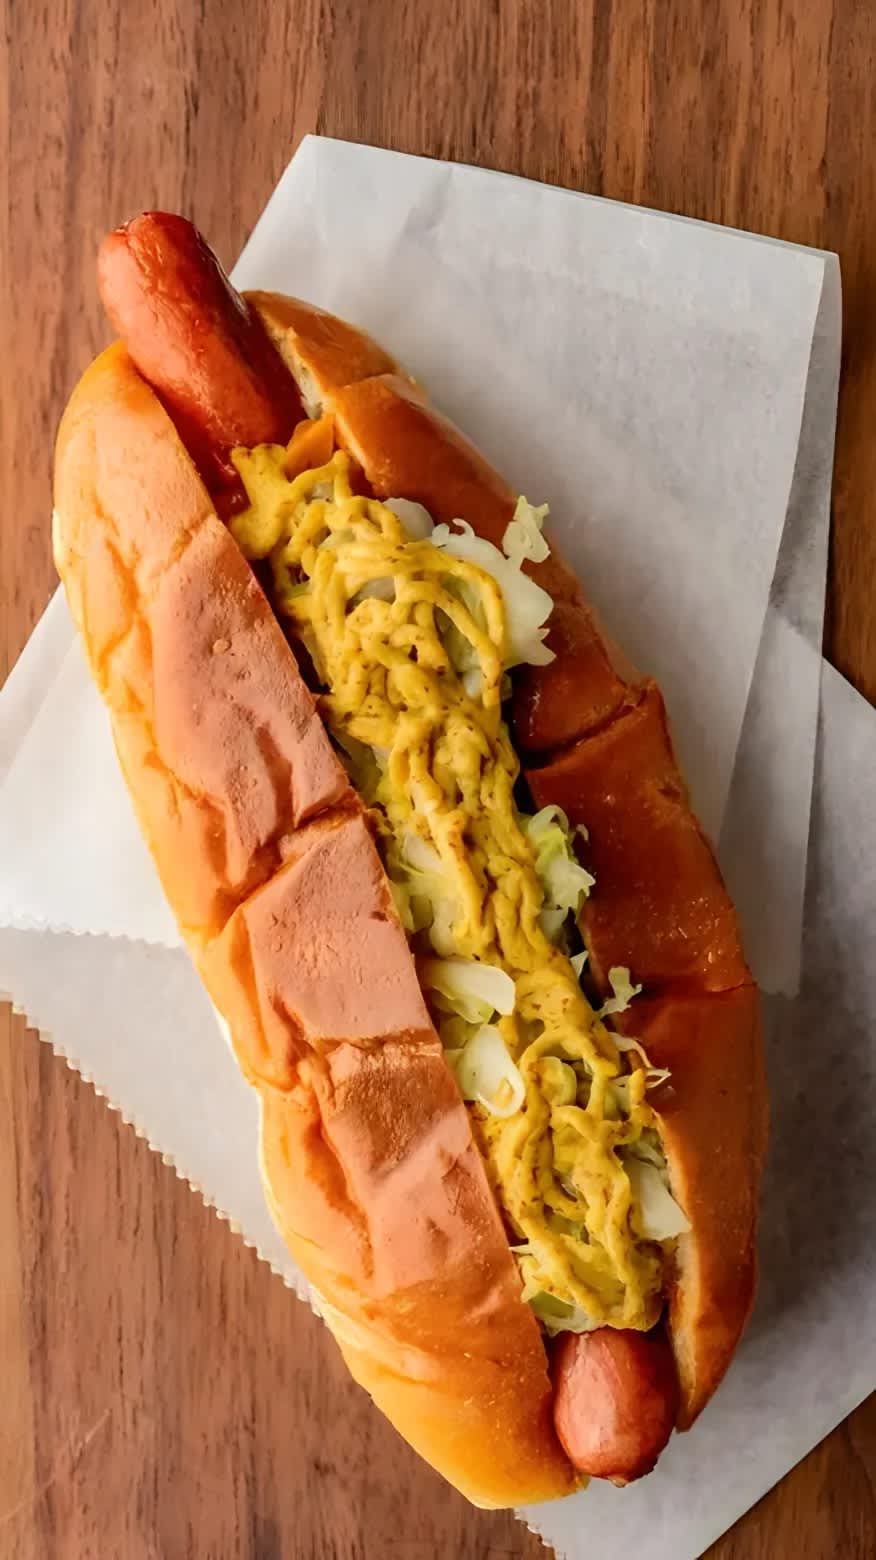 A New York style hot dog